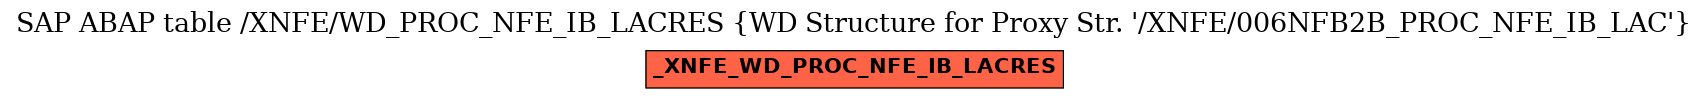 E-R Diagram for table /XNFE/WD_PROC_NFE_IB_LACRES (WD Structure for Proxy Str. 